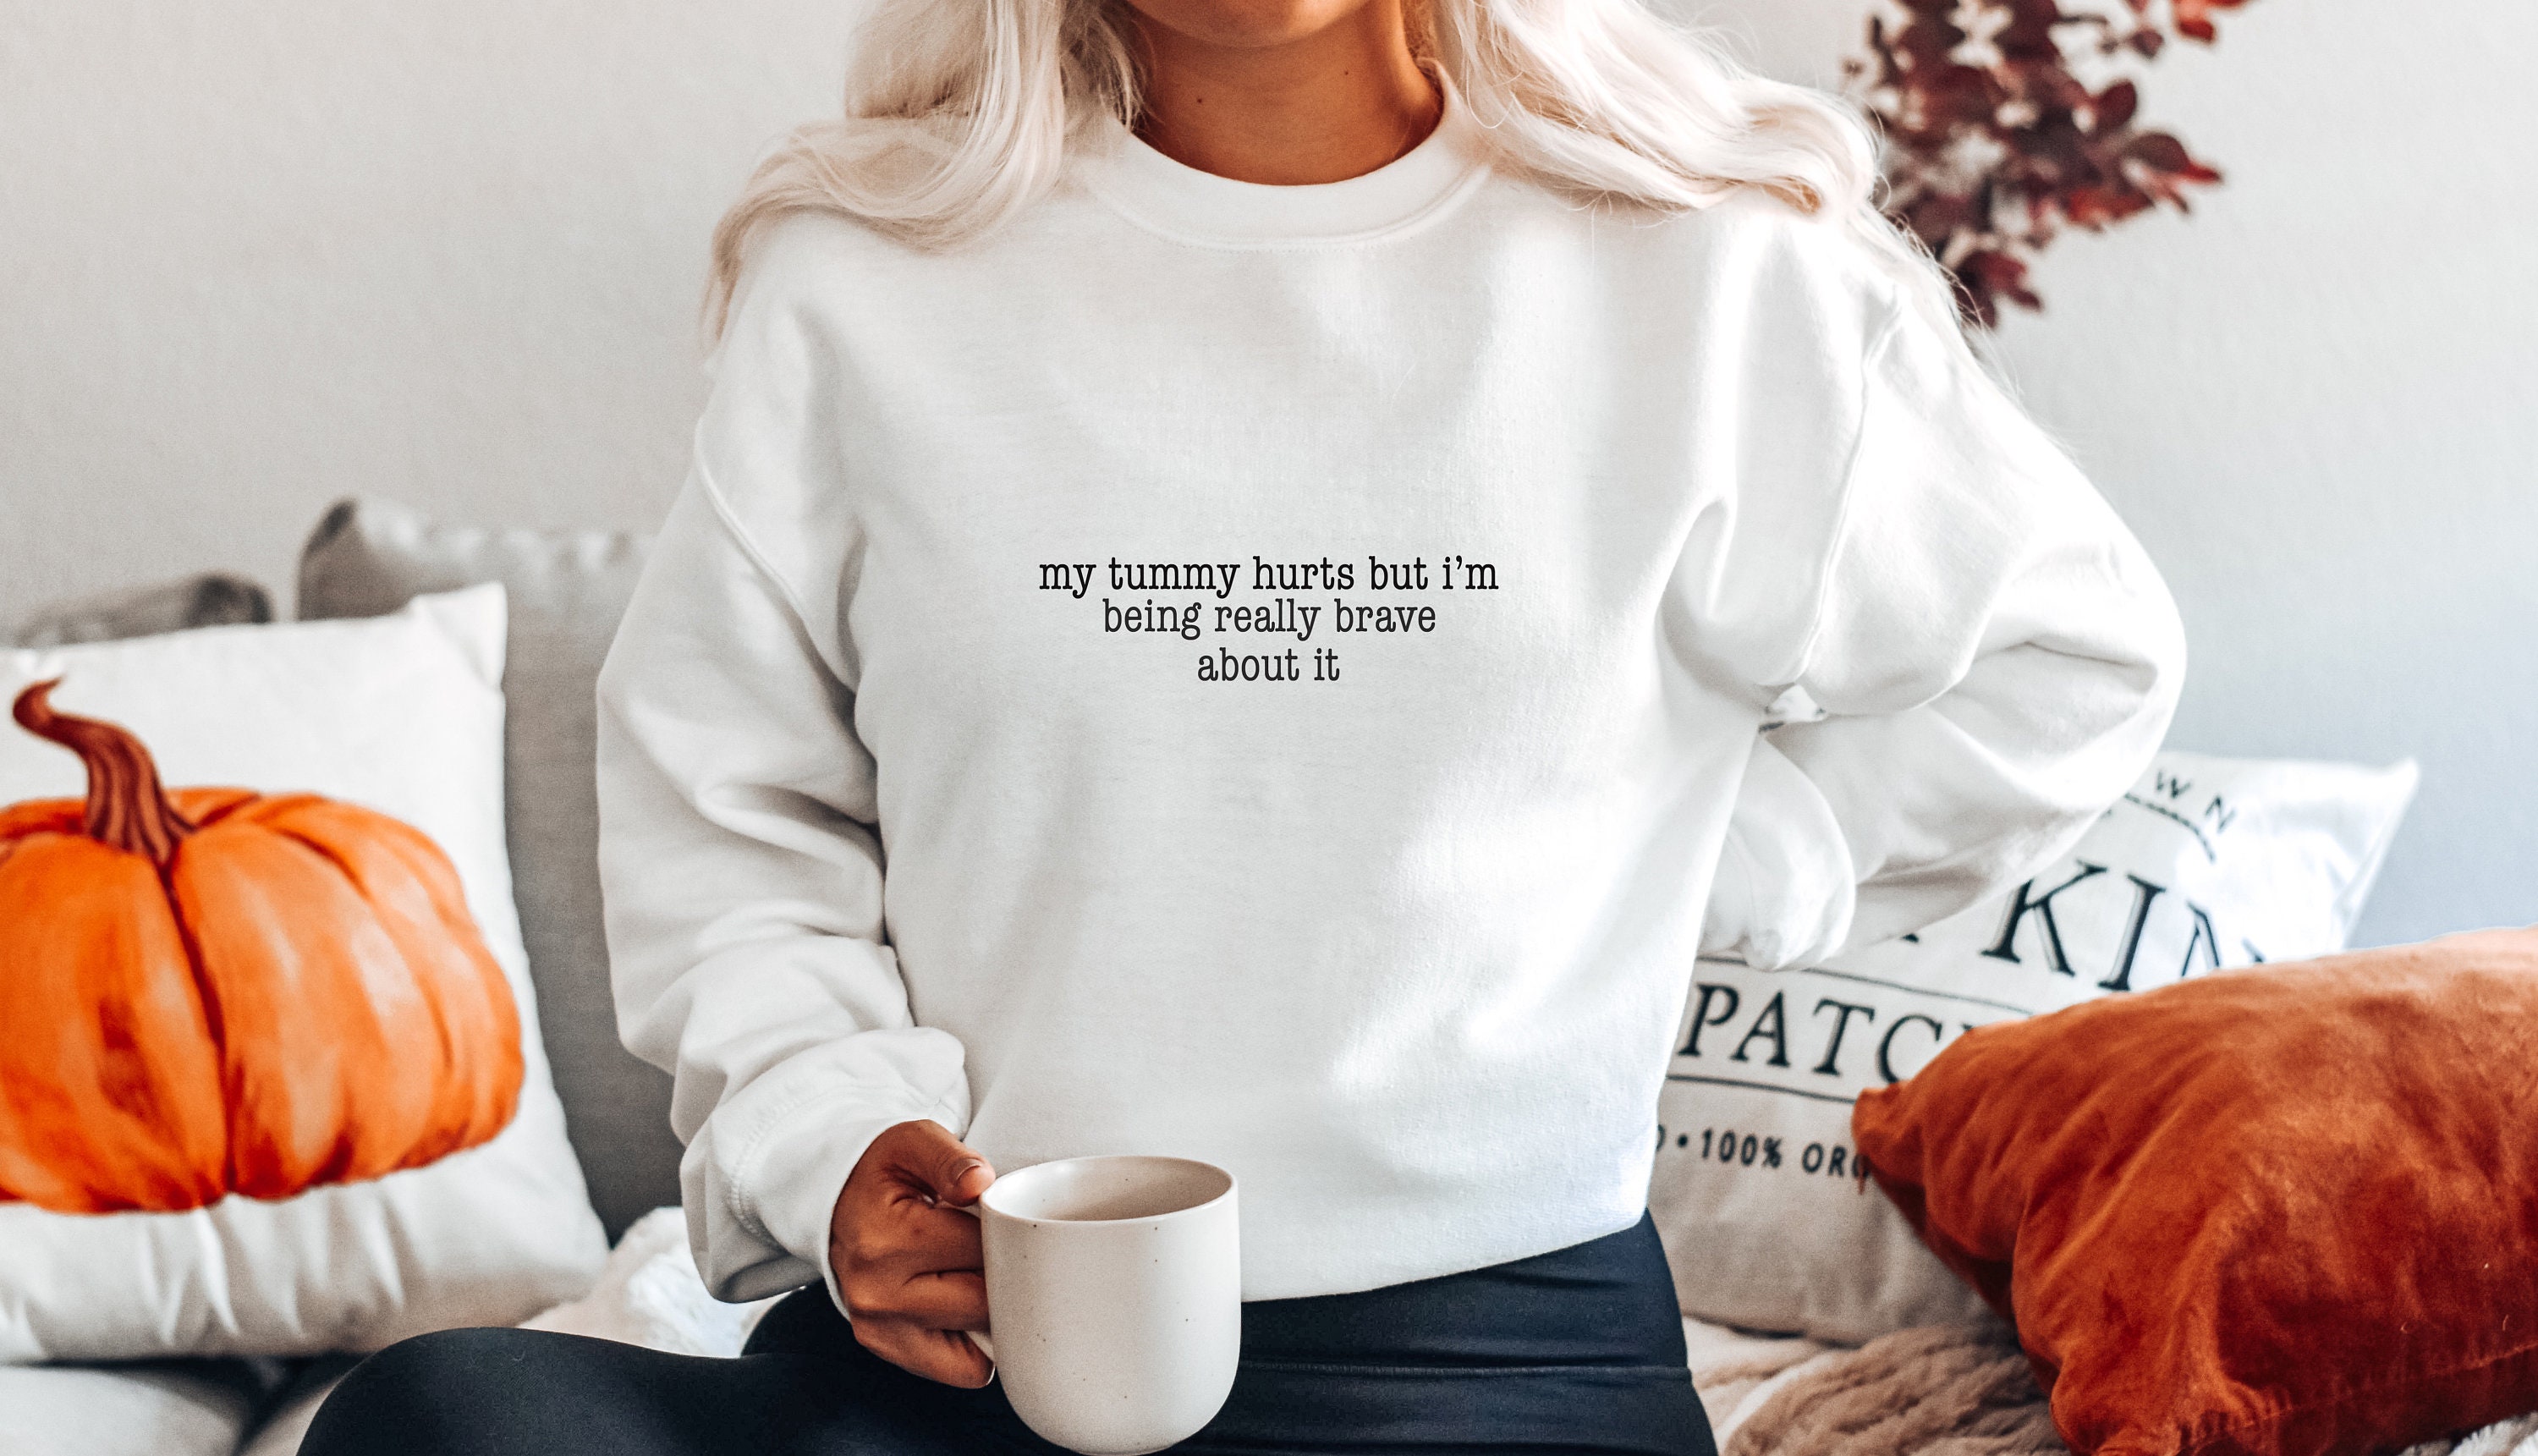 My Tummy Hurts But Im Being Really Brave About It Slogan Sweatshirt Chill Endo Cramps Period Sweater Jumper Girlfriend Wife Friend Xmas Gift